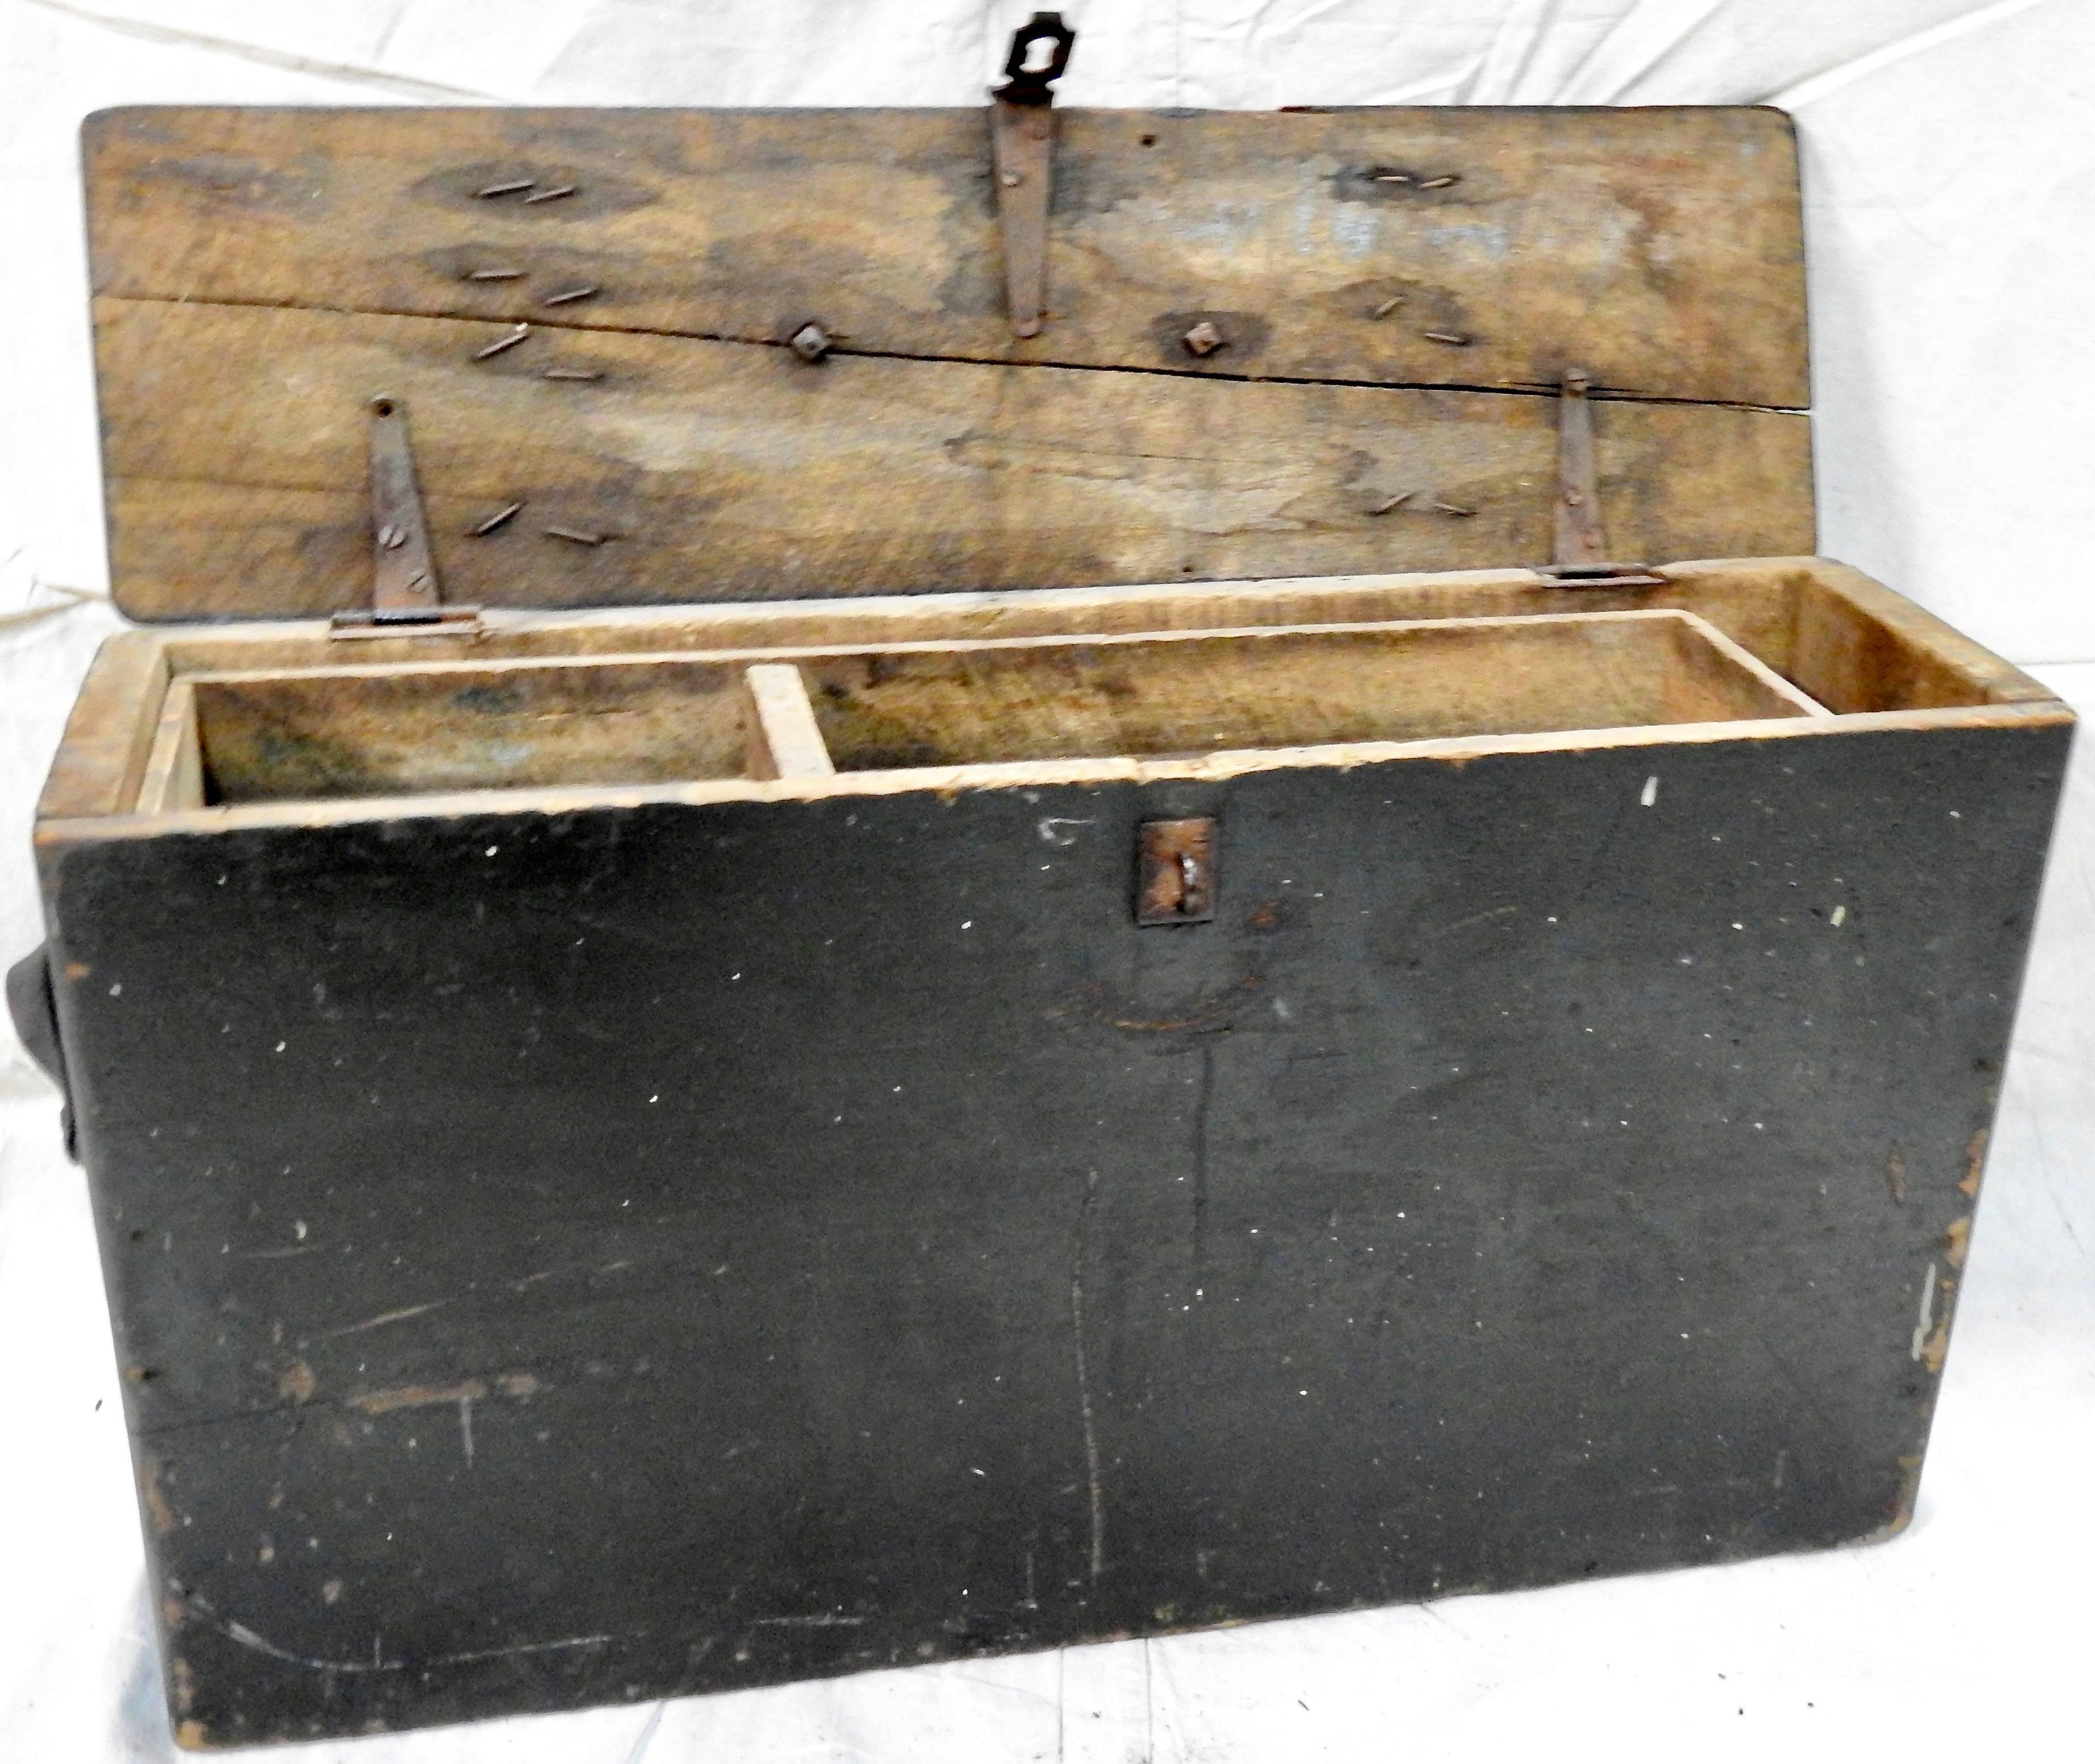 This Primitive tool box makes you wonder what it has held in its past. It has distressed black paint which will fit in with any decor. It boasts leather handles on the sides and the top. There is a metal clasp on the front if you choose to add a